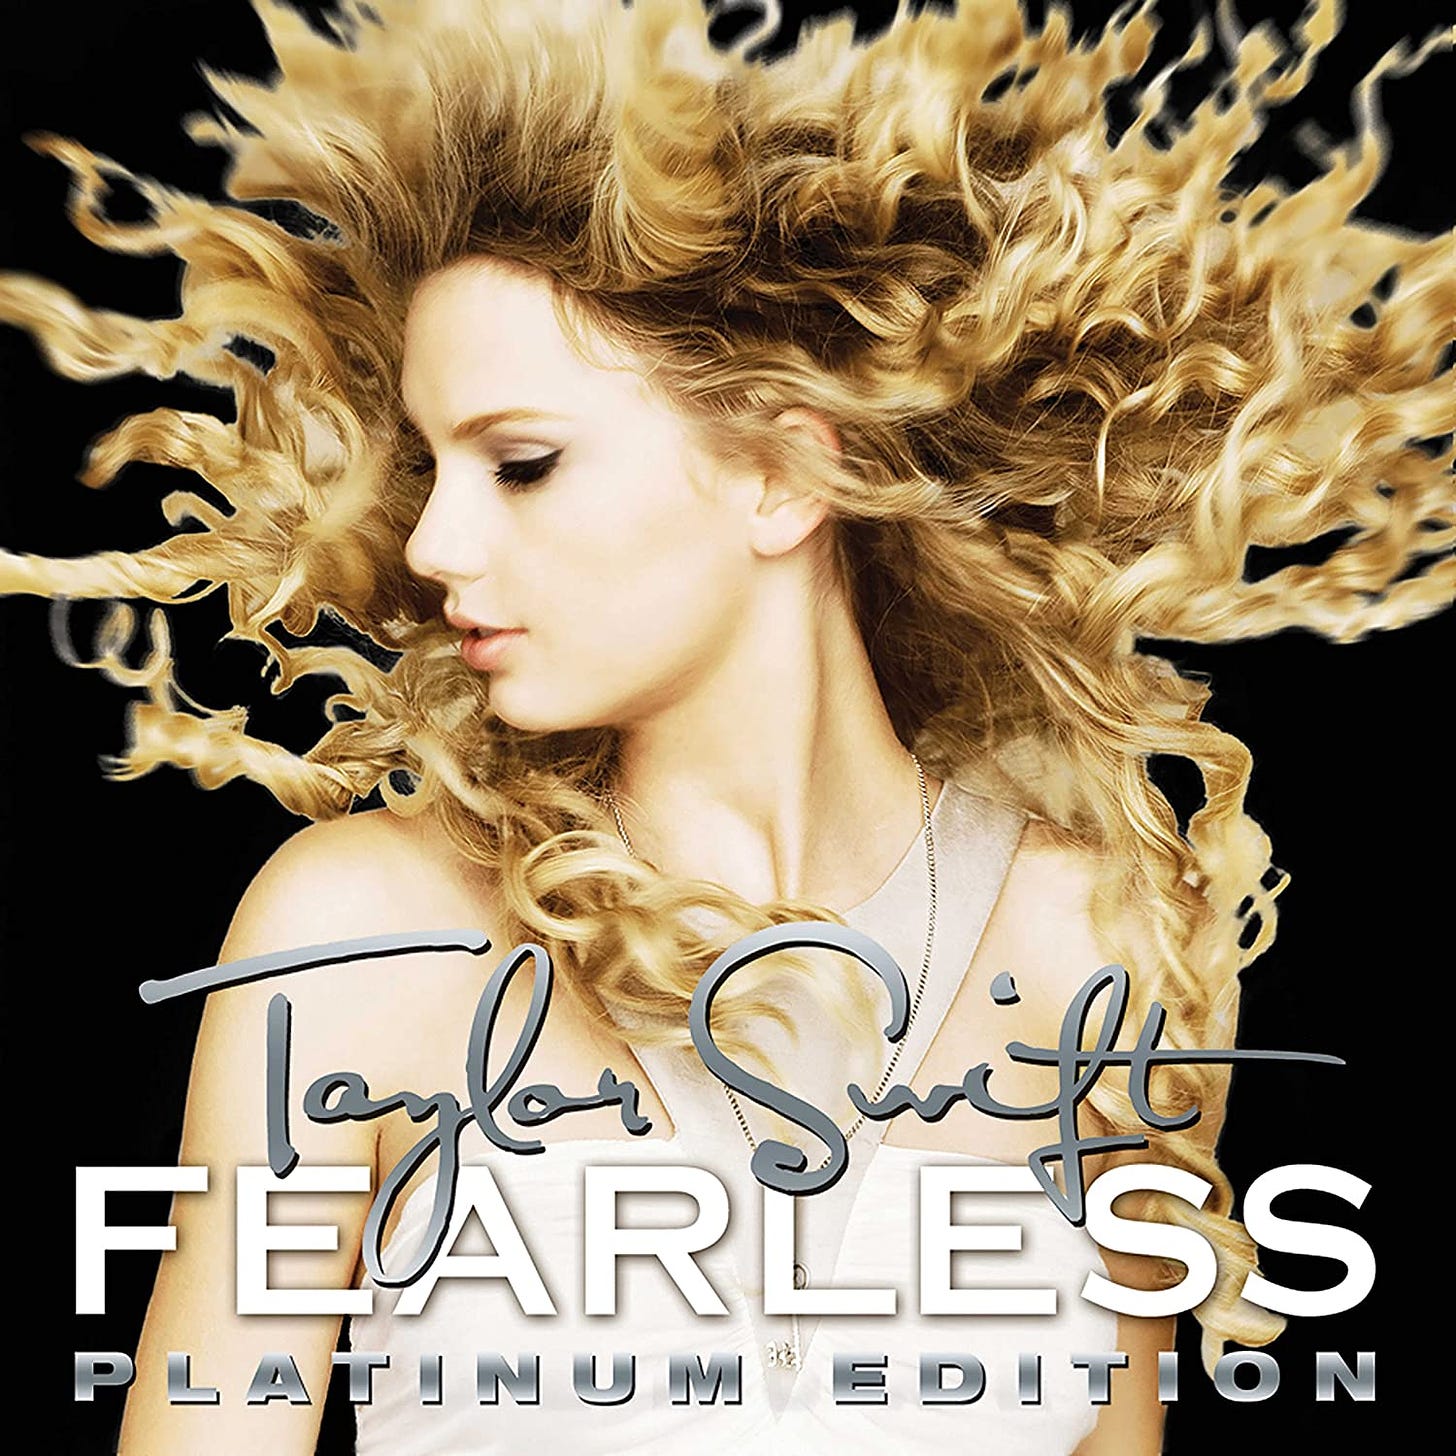 Taylor Swift – Fearless album art - Fonts In Use